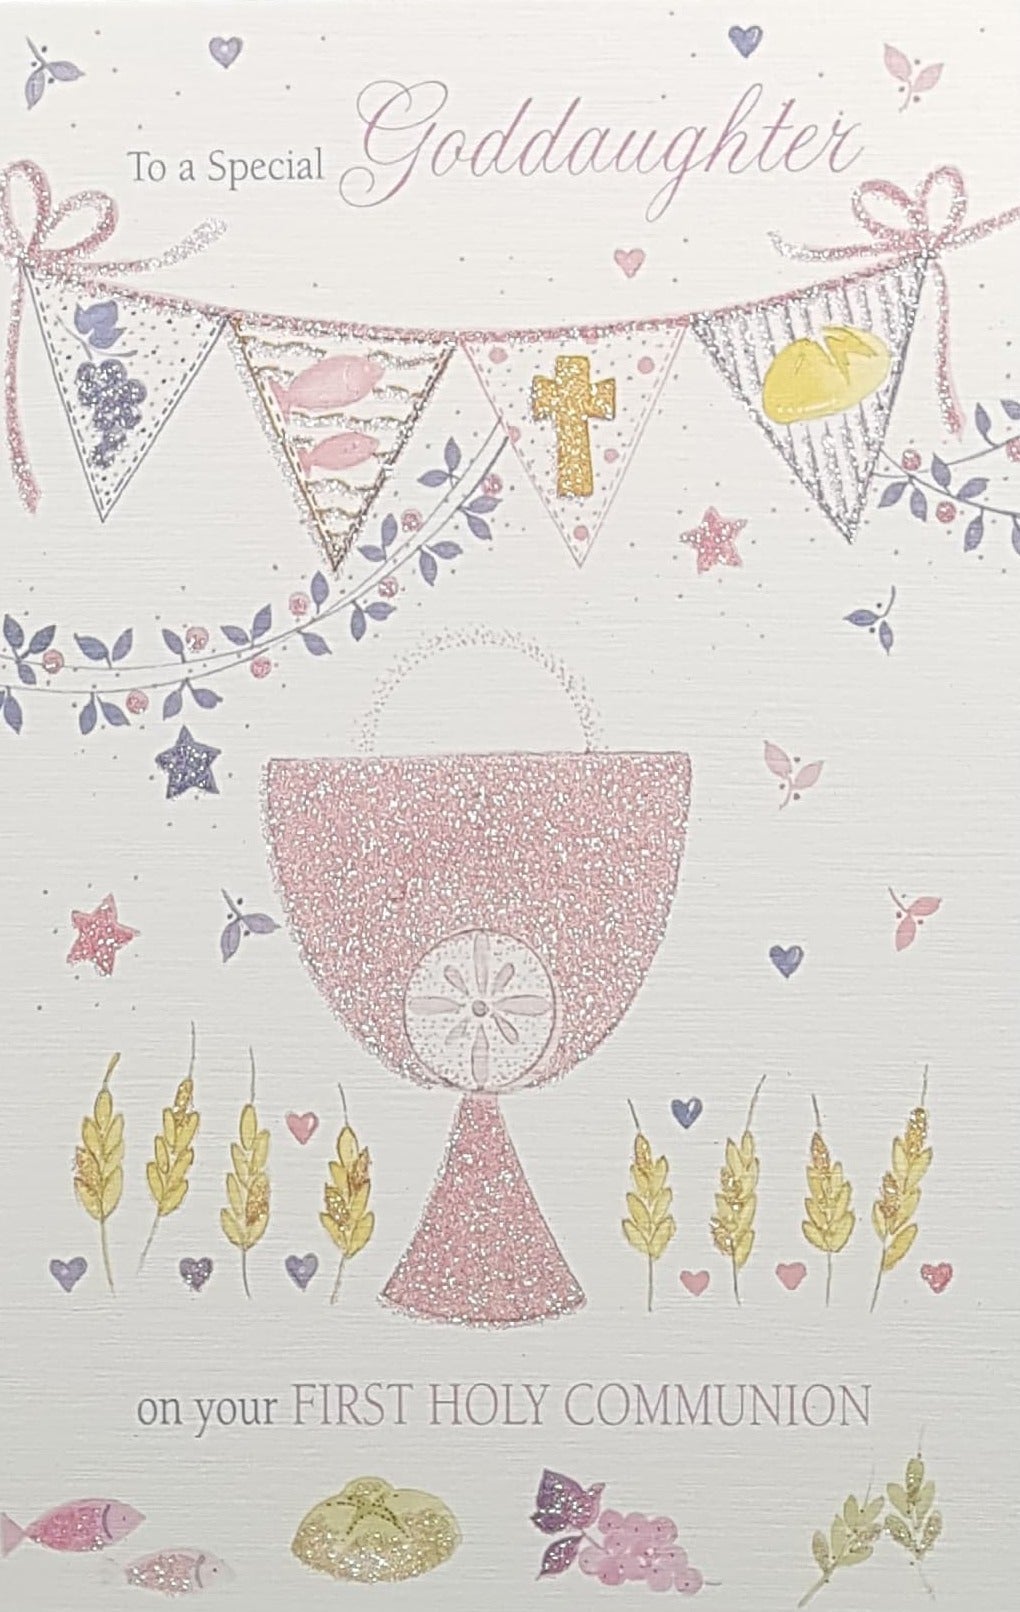 Communion Card - Goddaughter / A Glittery Yellow Cross On A Pink Banner